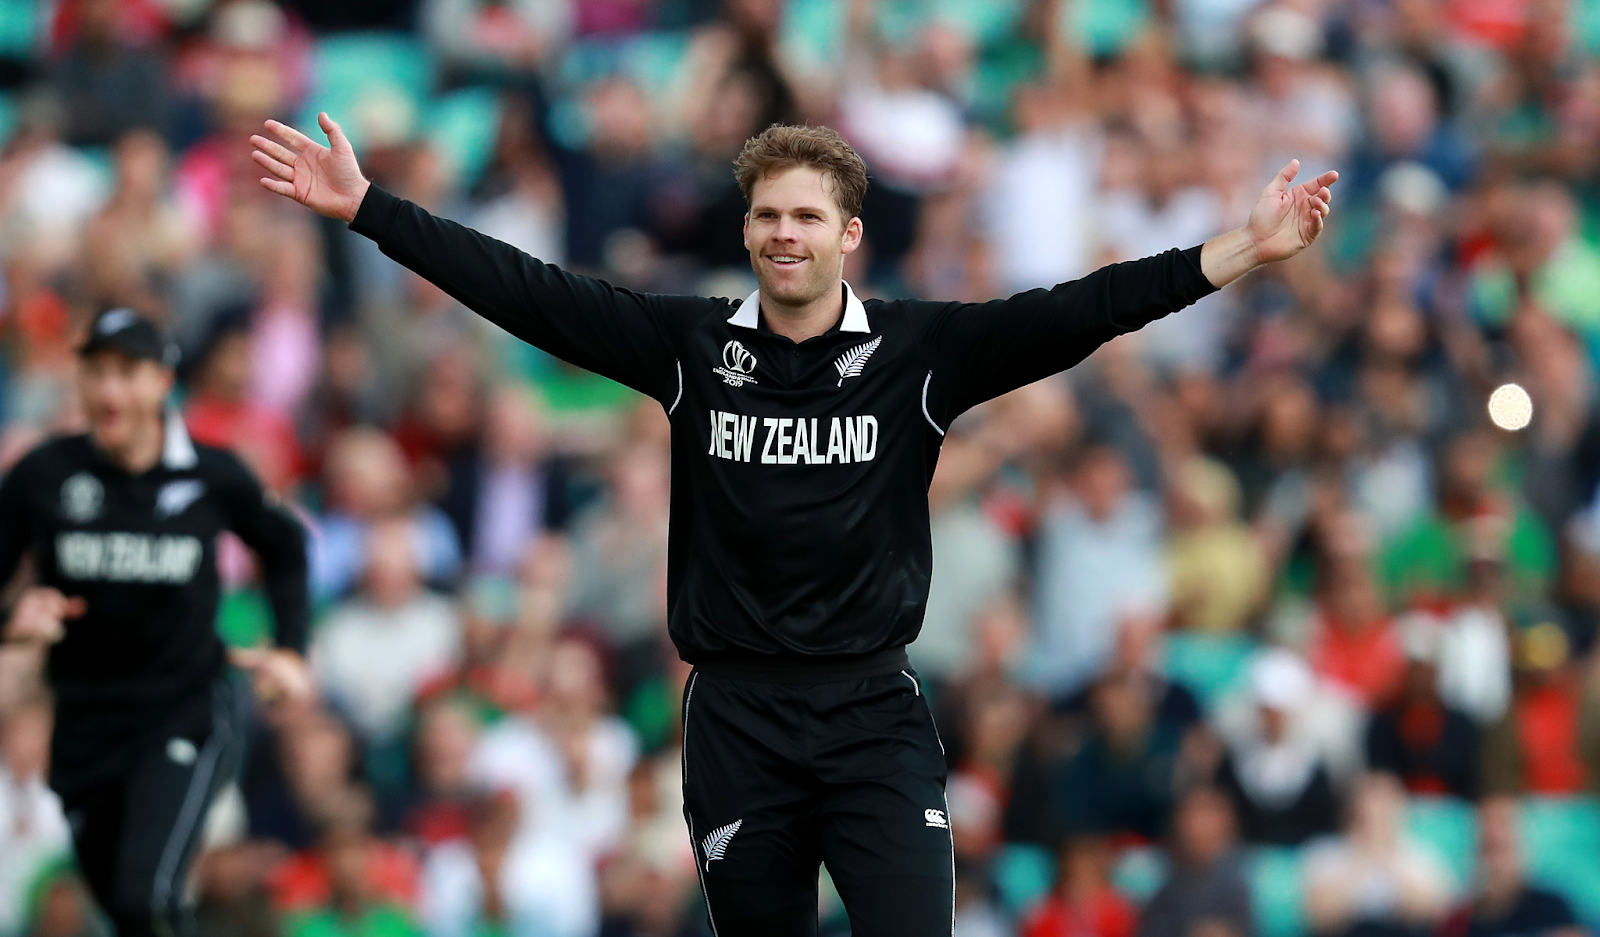 Lockie Ferguson has emerged as the strike bowler for the Blackcaps in the death overs